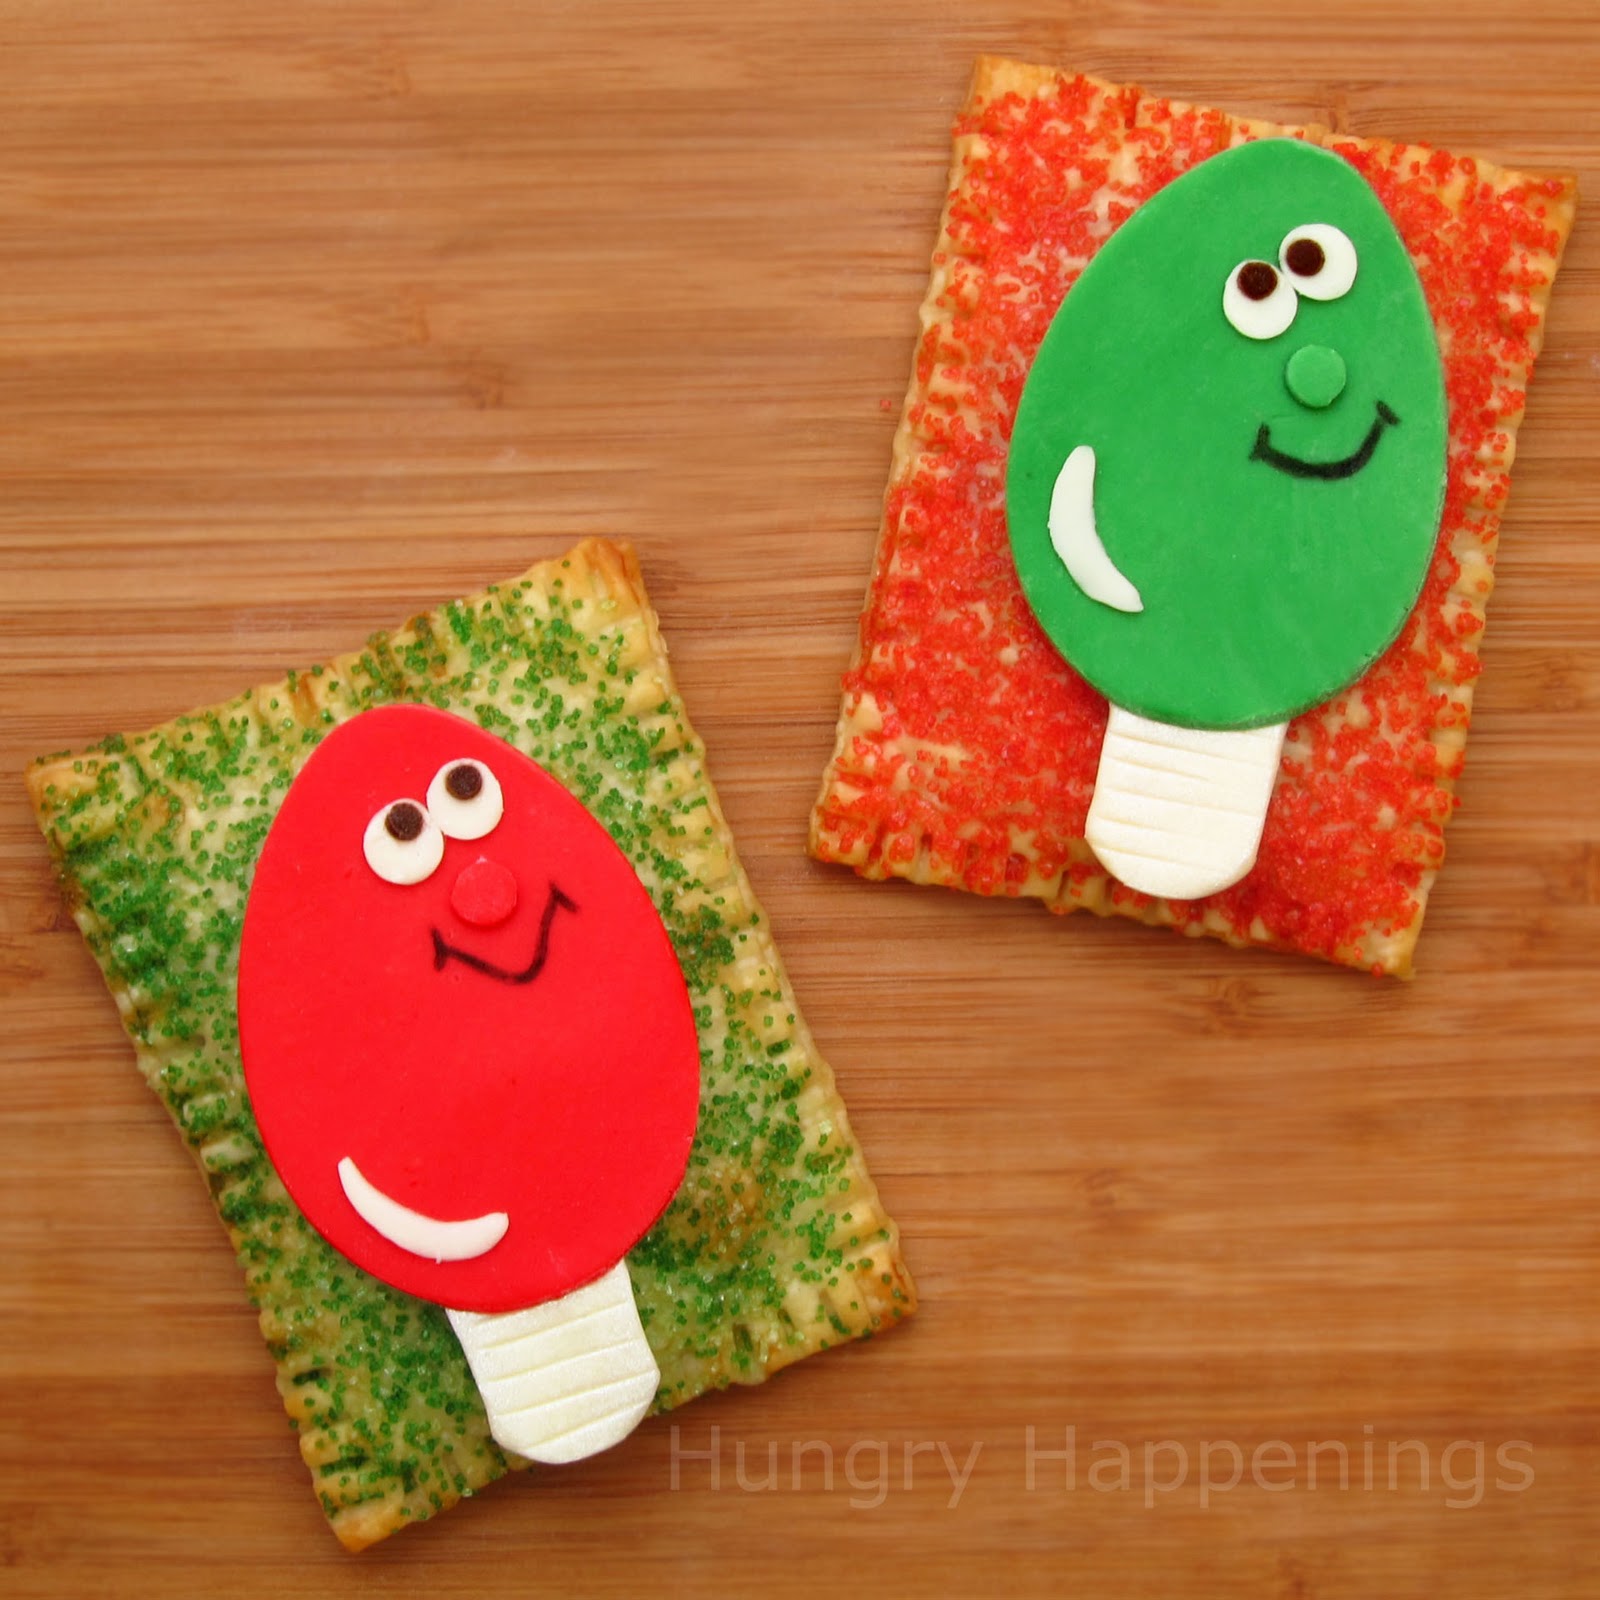 Twelve days of sweet designs, day 12 - Cheery Christmas Lights - Hungry Happenings